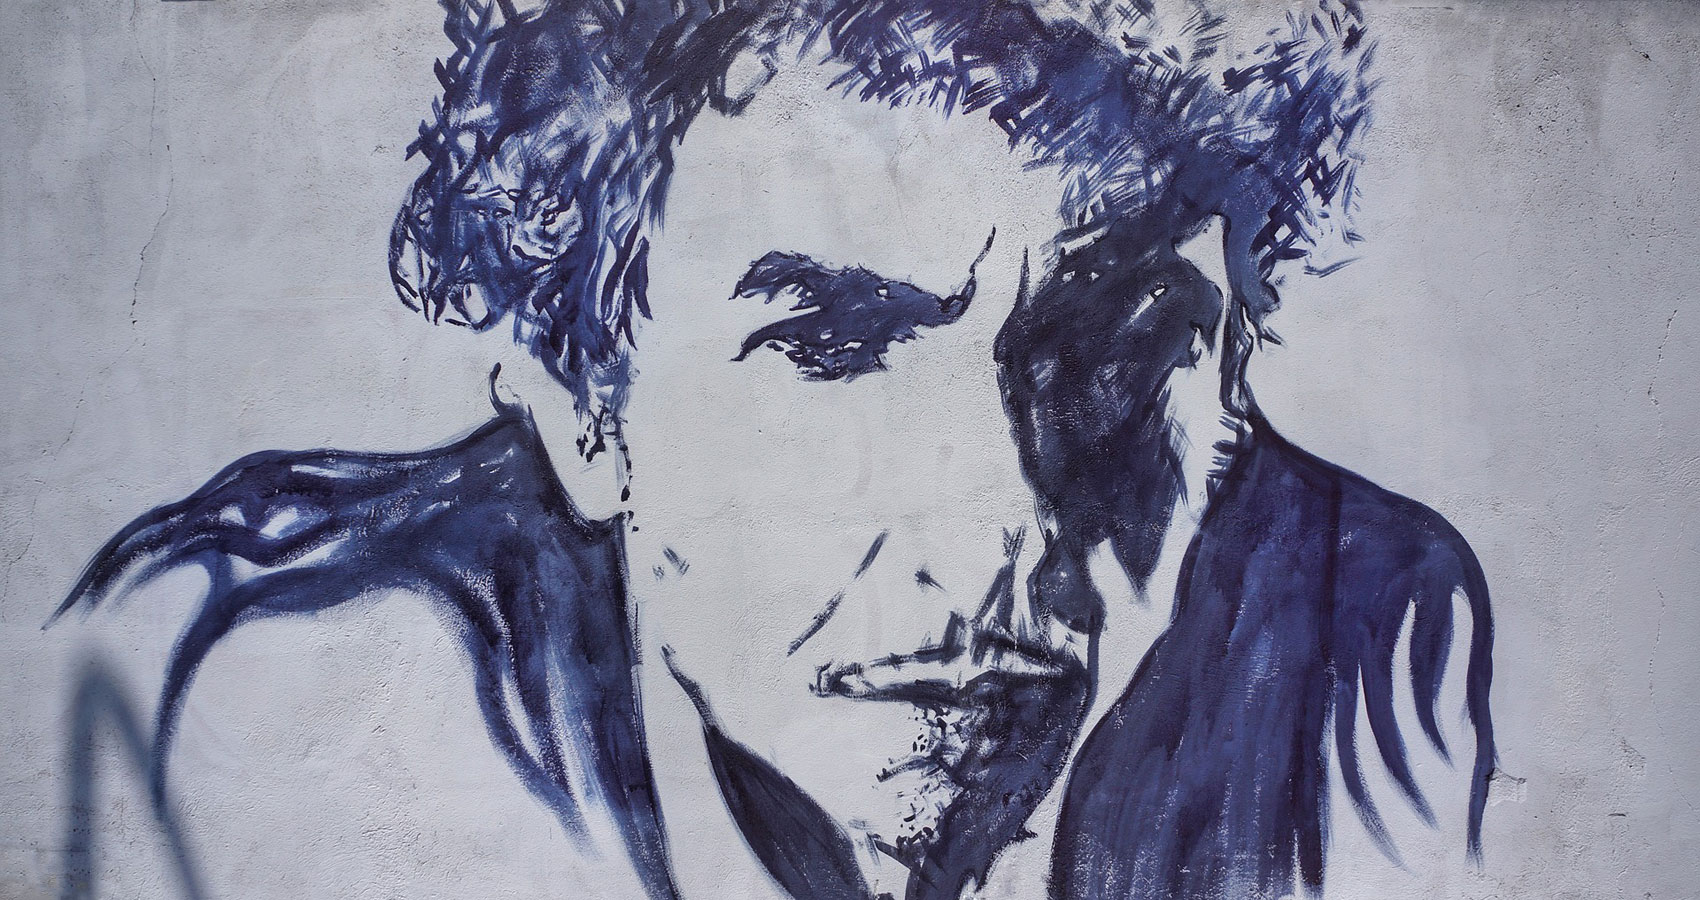 Magical Dylan by Mario William Vitale at Spillwords.com